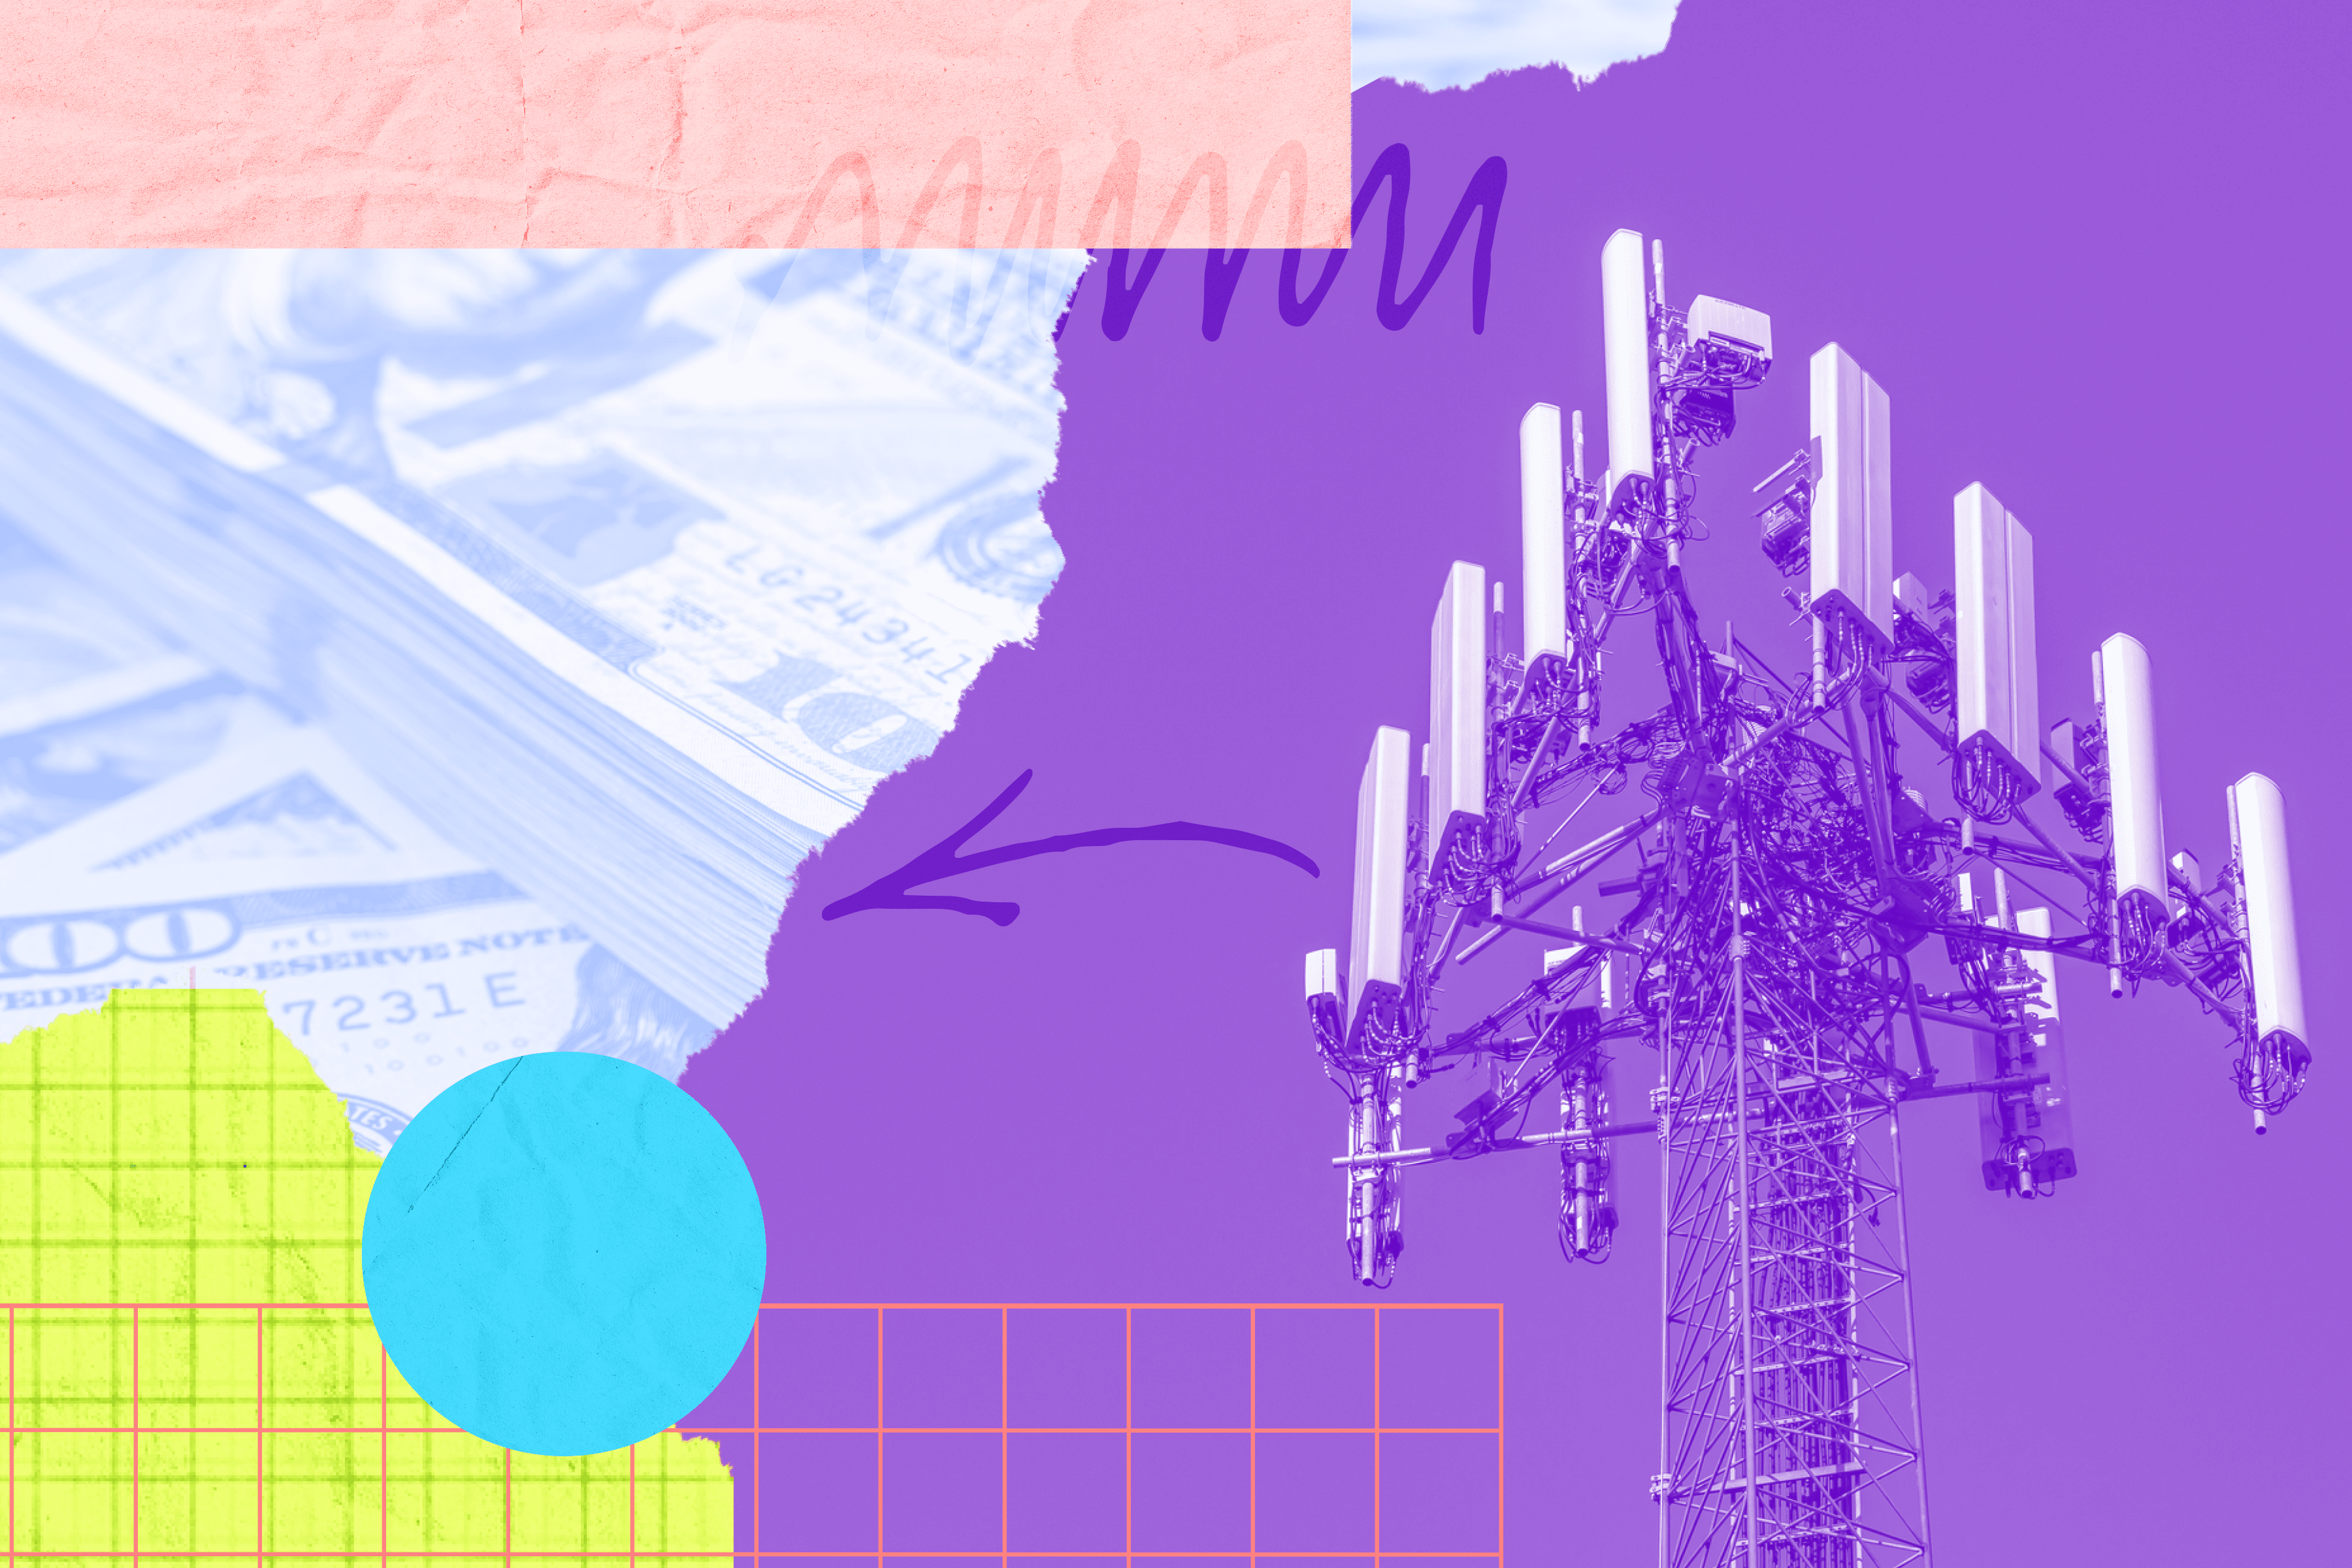 Illustration of a cell tower and stacks of money